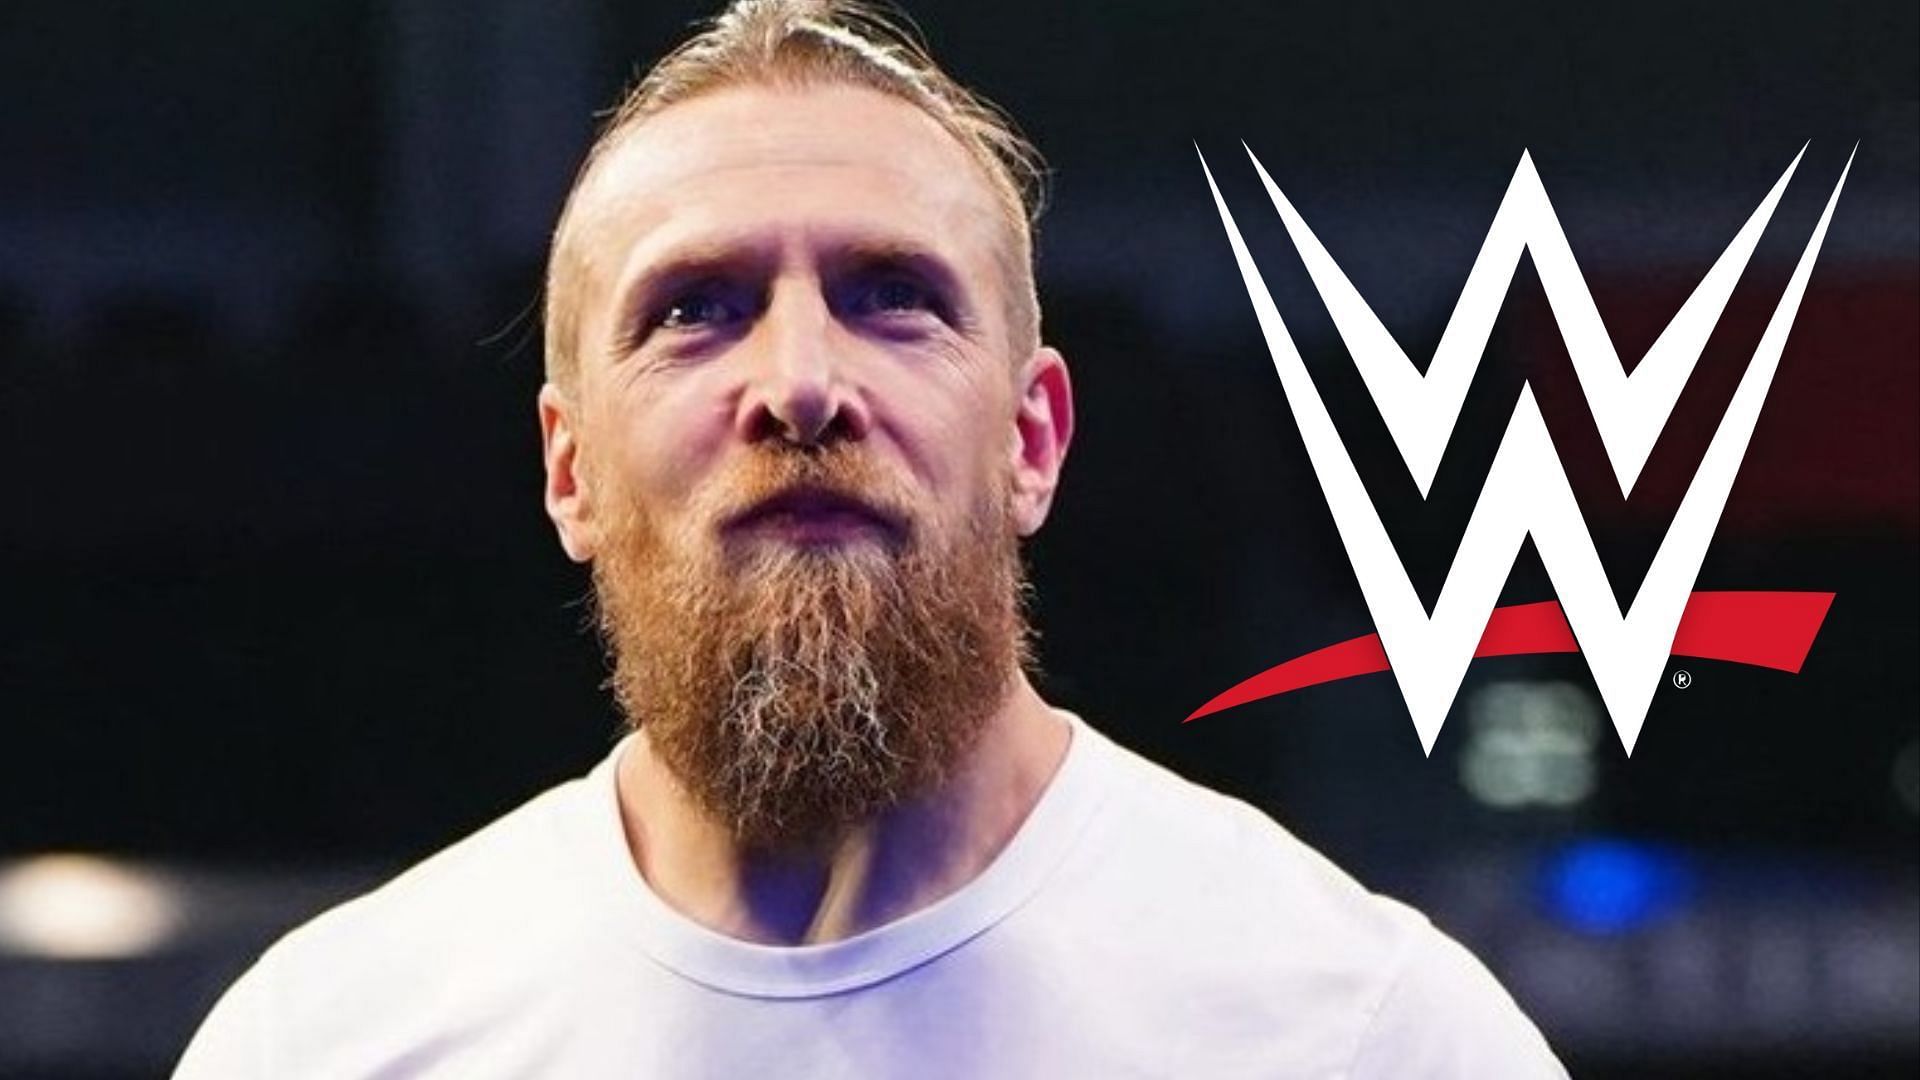 Former WWE Champion and current AEW star Bryan Danielson